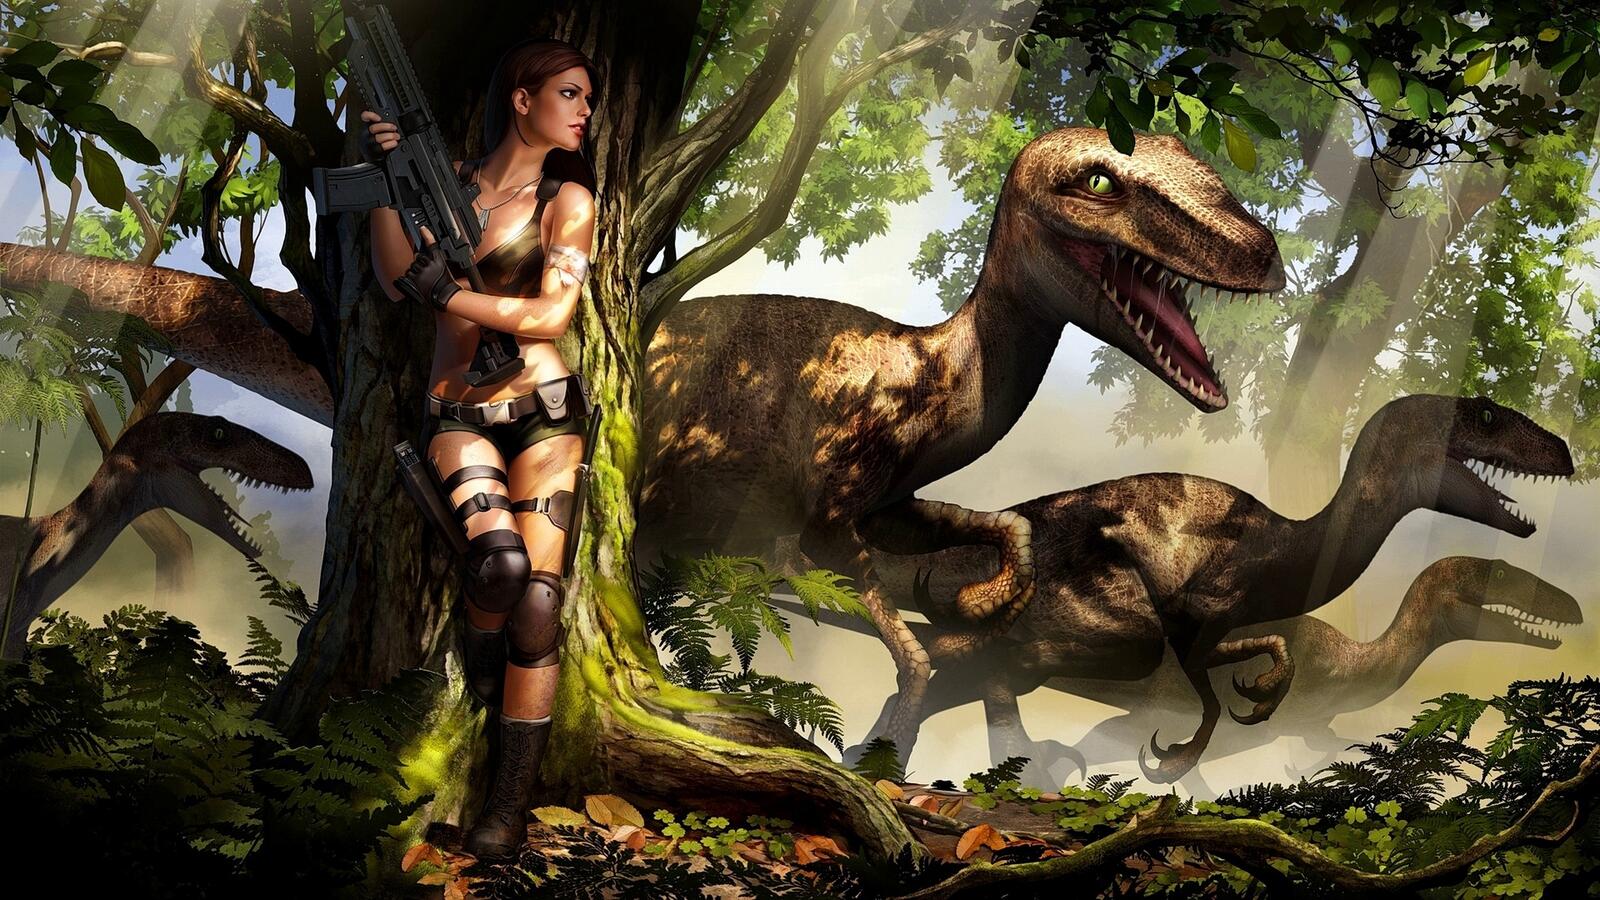 Free photo The girl with the machine gun standing behind the tree and the dinosaurs